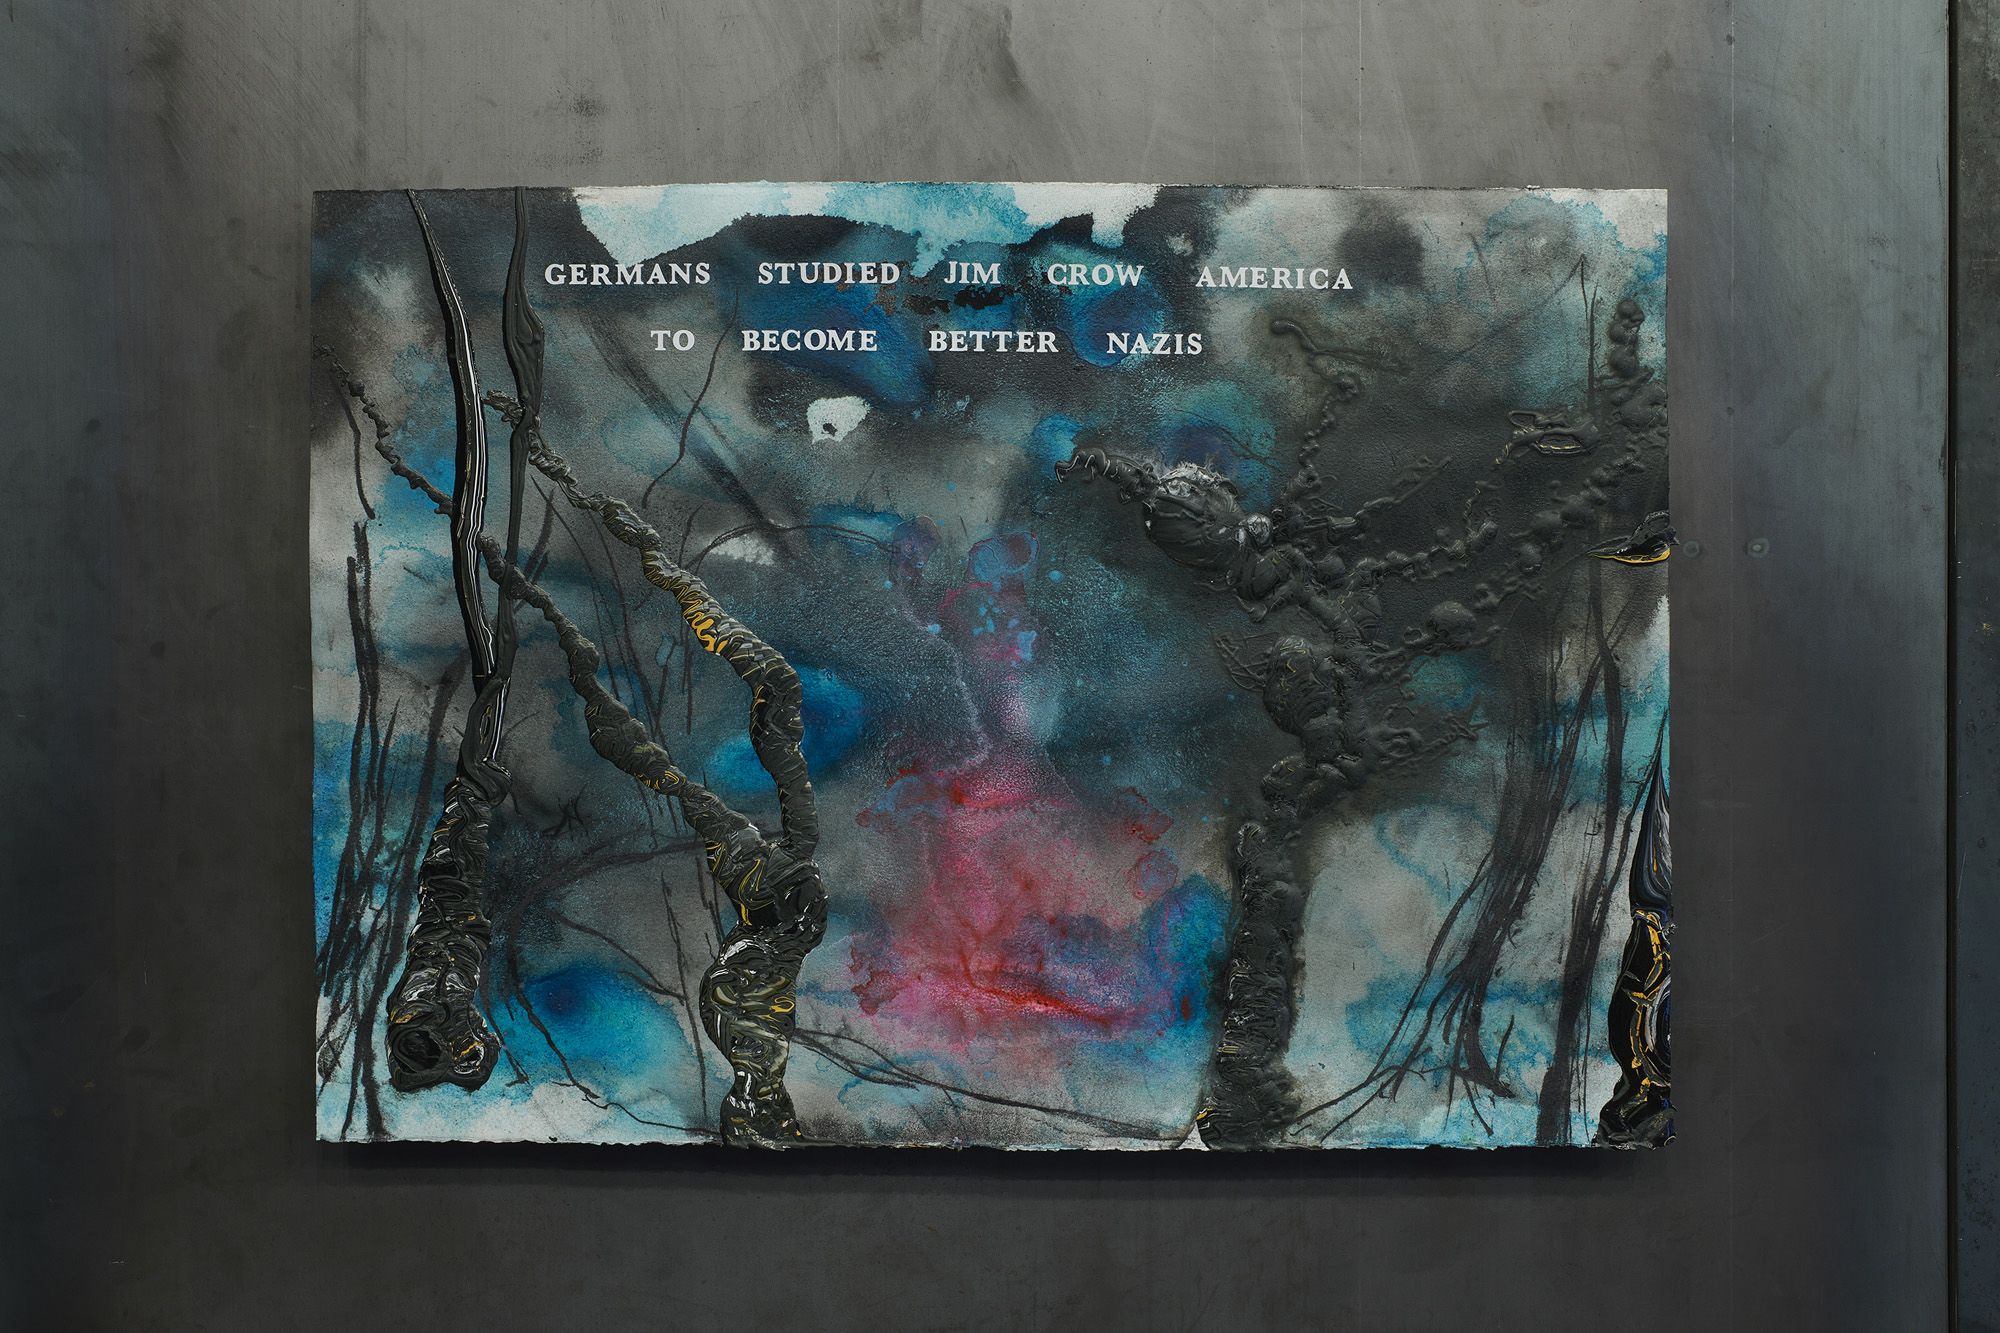 ICE AND FIRE: A BENEFIT EXHIBITION IN THREE PARTS | Rodney McMillian